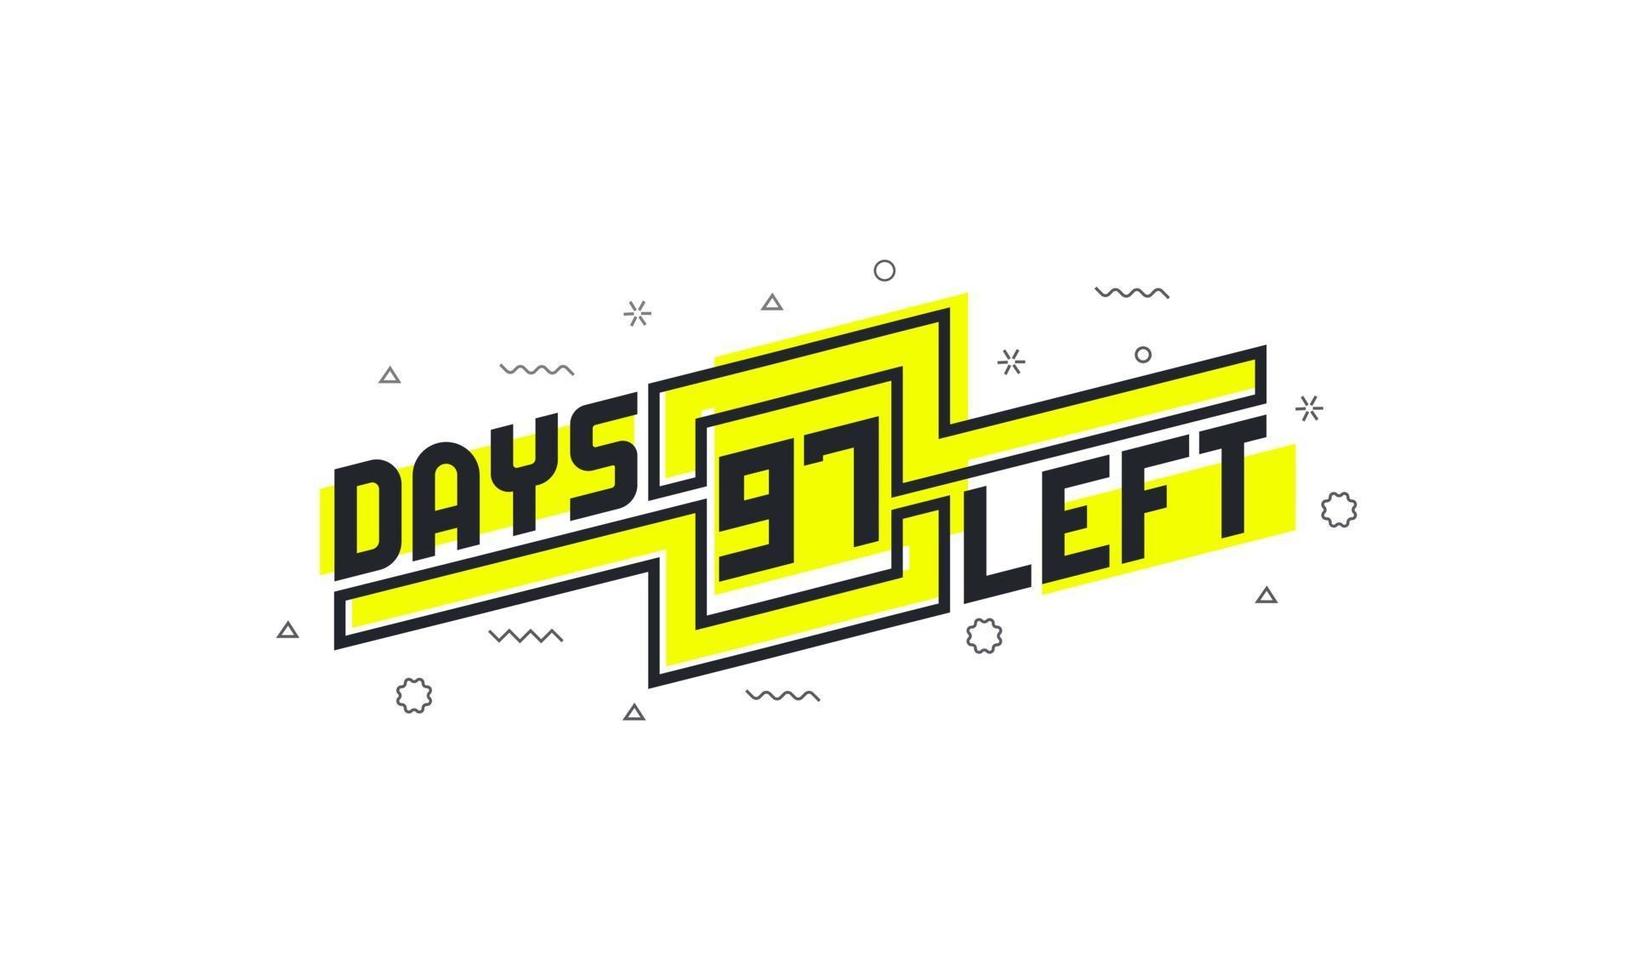 97 days left countdown sign for sale or promotion. vector